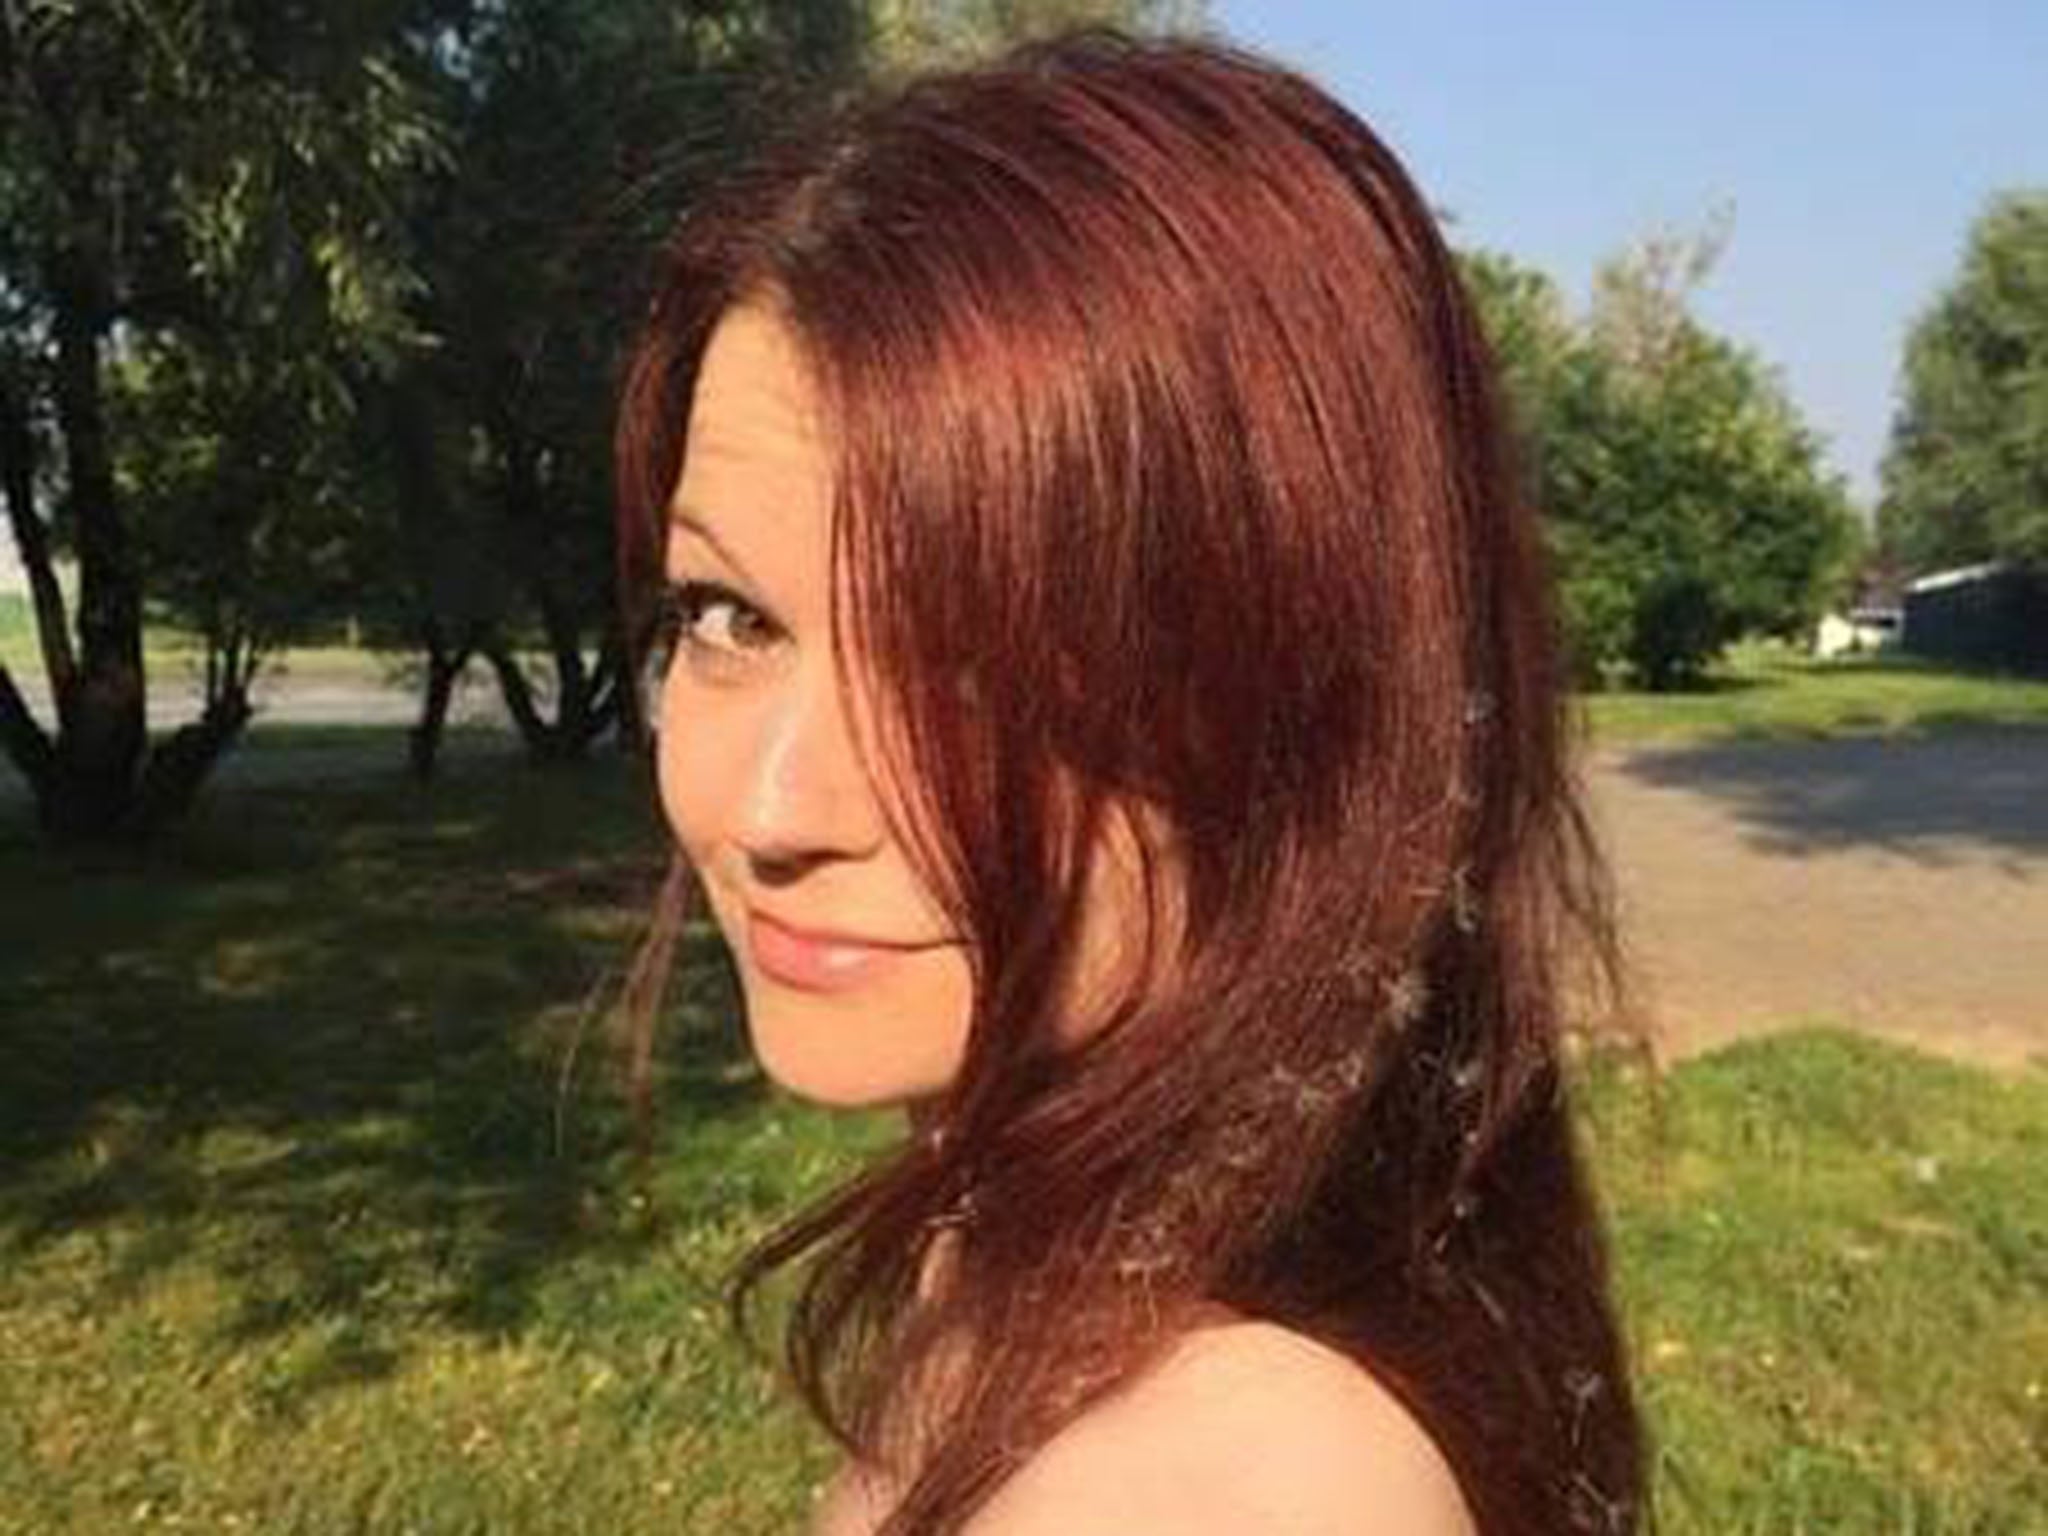 Yulia Skripal was found unconscious next to her father